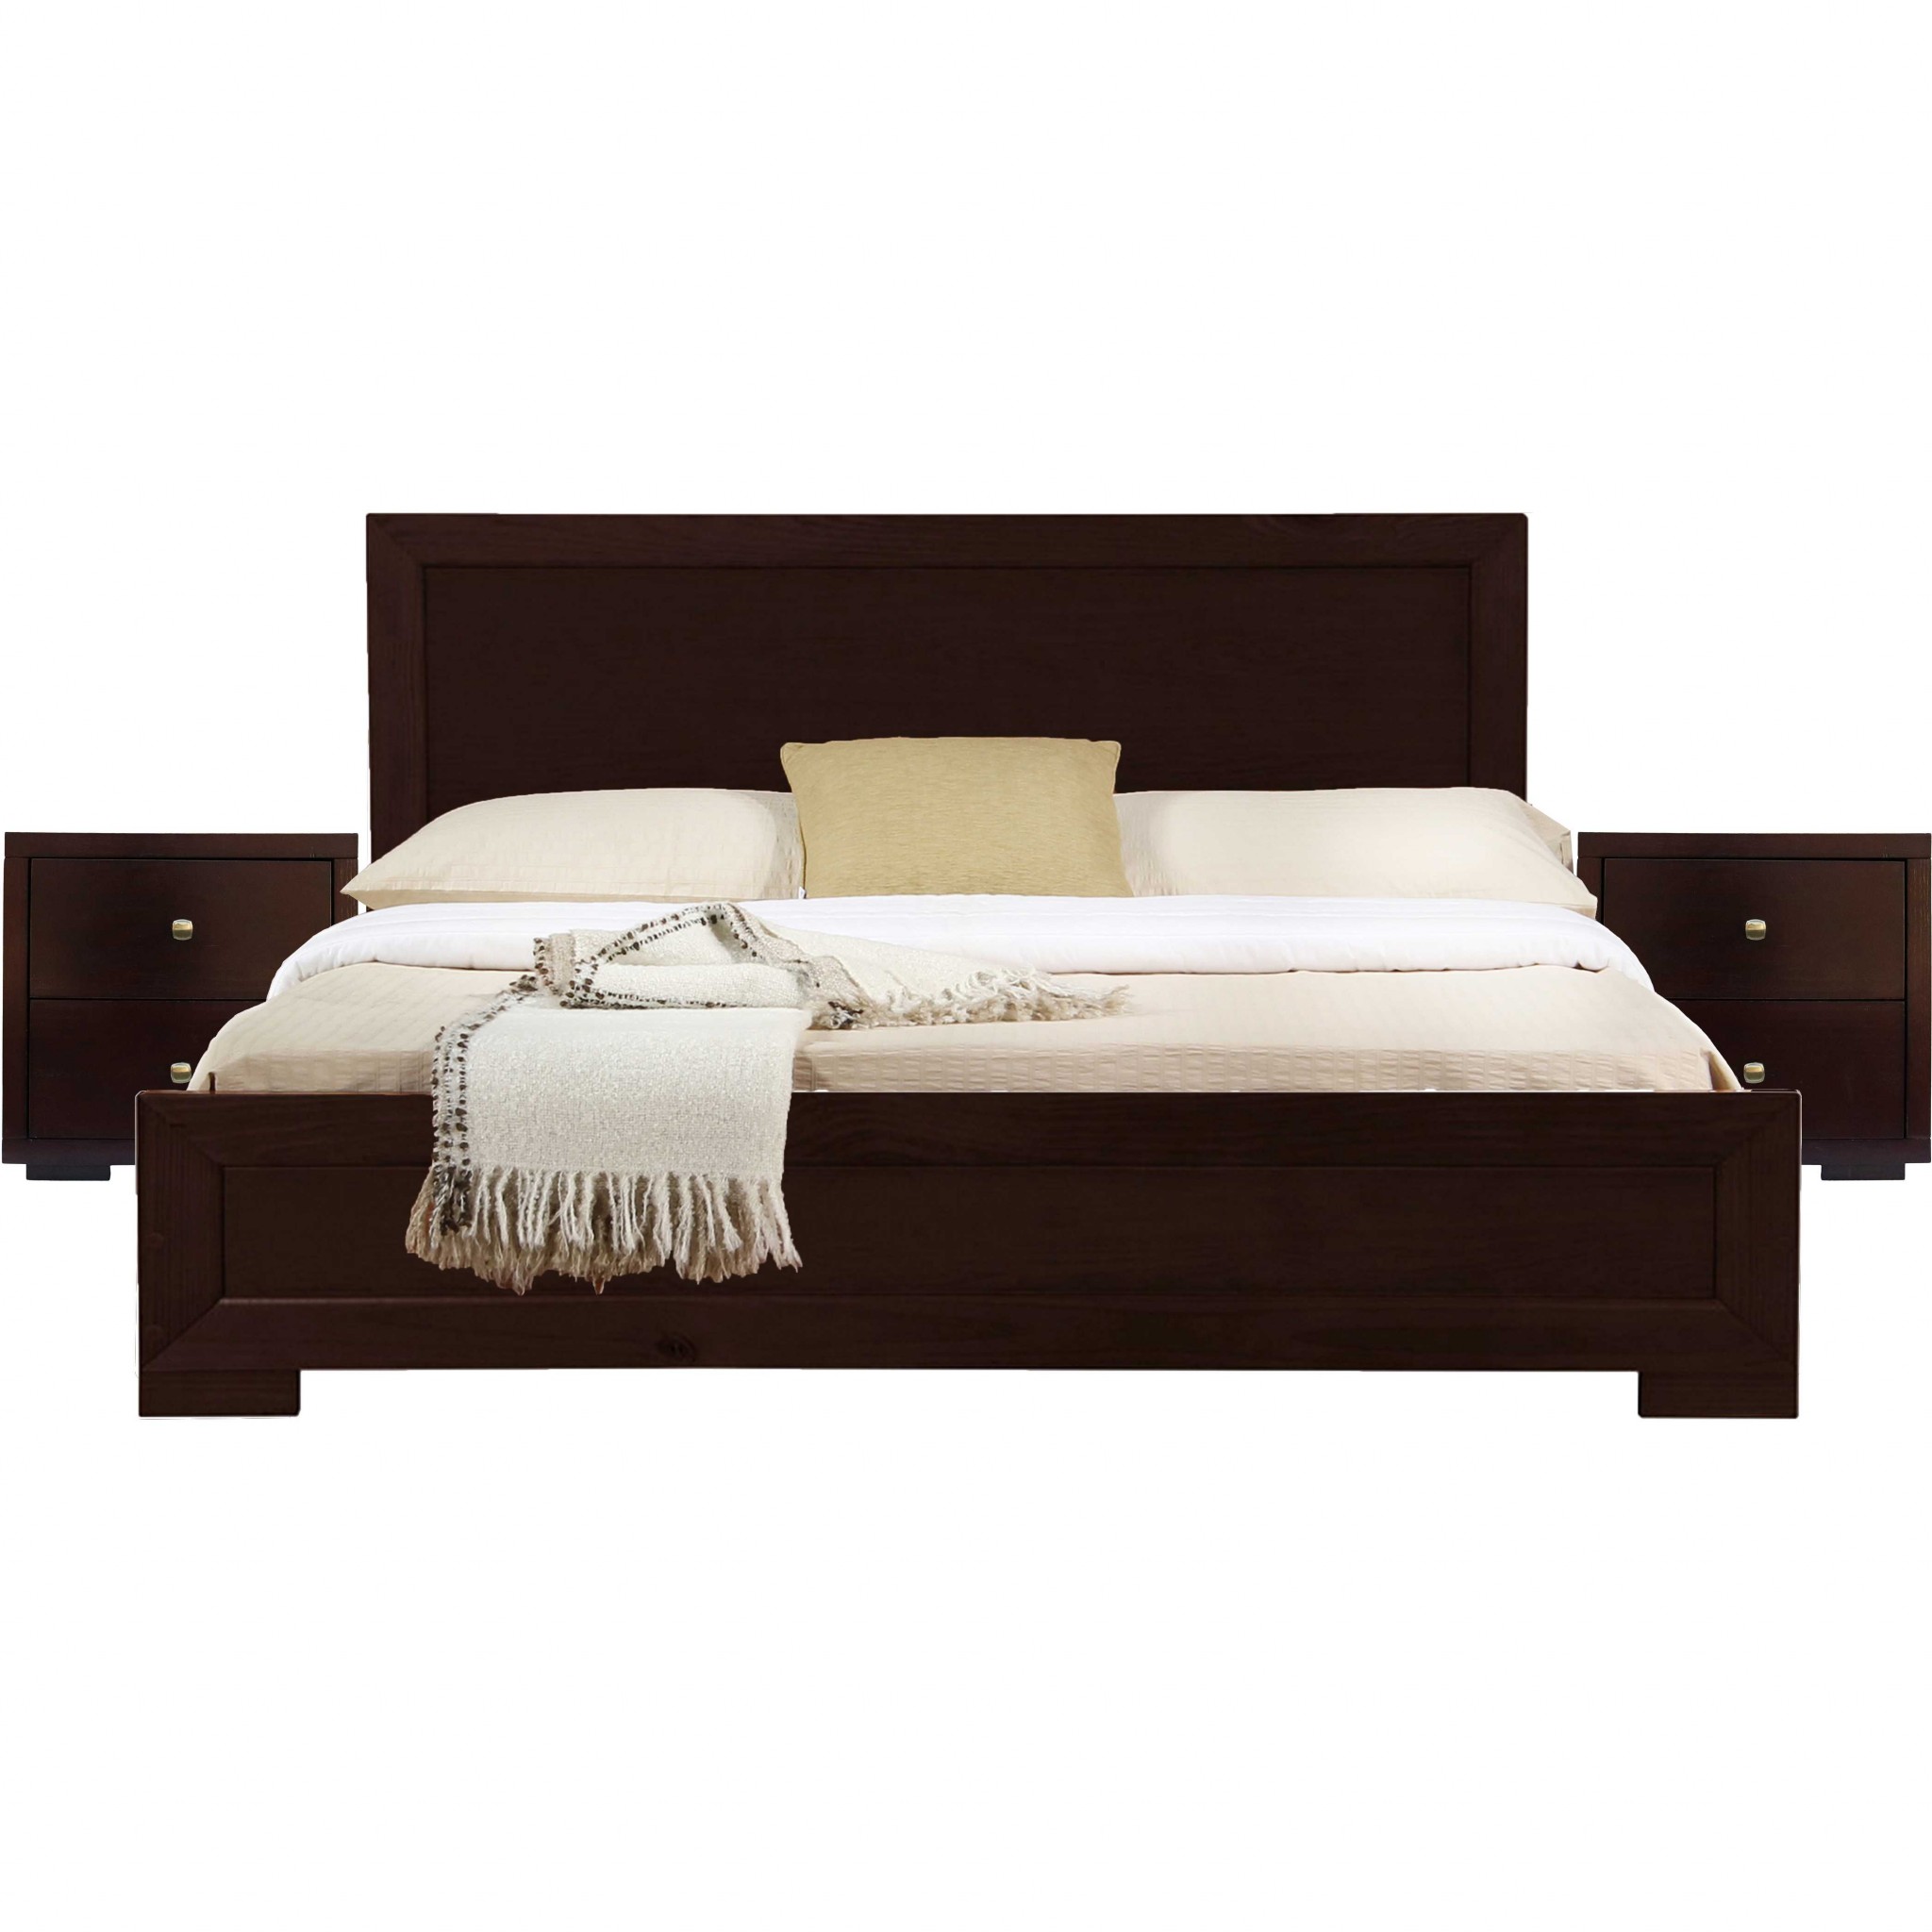 Moma Espresso Wood Platform King Bed With Two Nightstands-468266-1